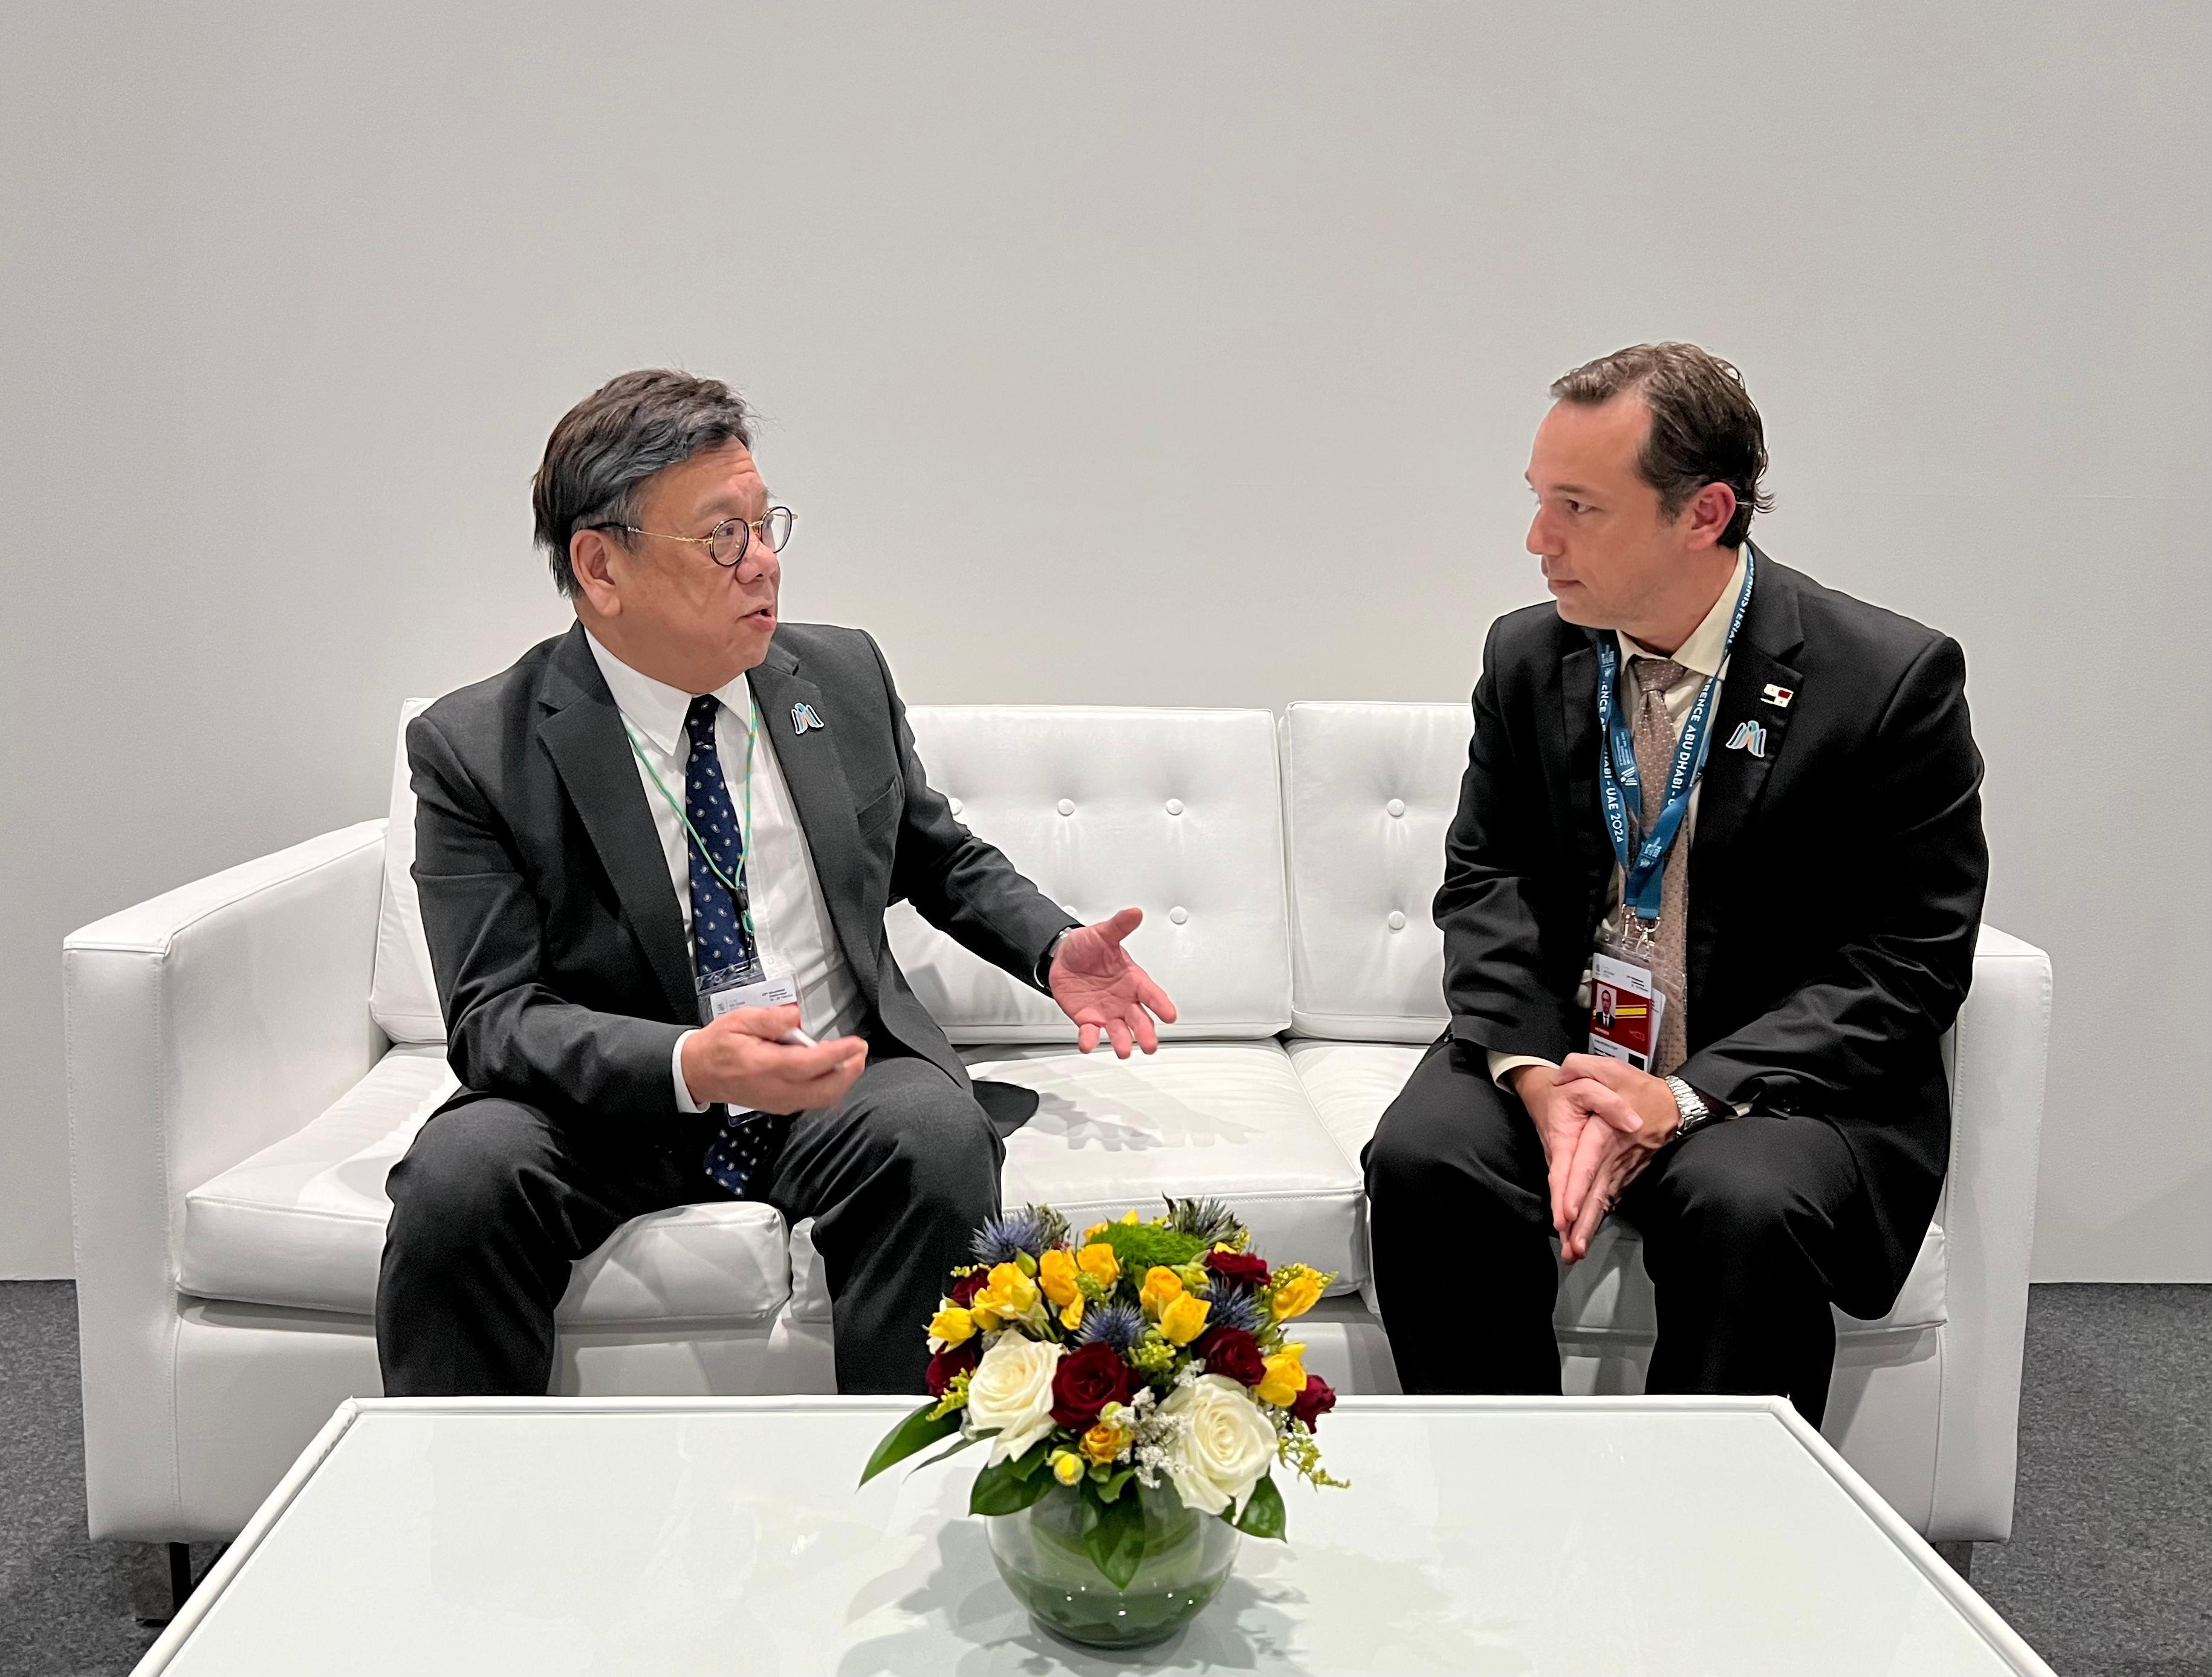 The Secretary for Commerce and Economic Development, Mr Algernon Yau (left), meets with the Minister of Commerce and Industries of Panama, Dr Jorge Rivera Staff (right), on the sidelines of the 13th World Trade Organization Ministerial Conference in Abu Dhabi, the United Arab Emirates, on February 25 (Abu Dhabi time) to exchange views on issues of mutual interest.